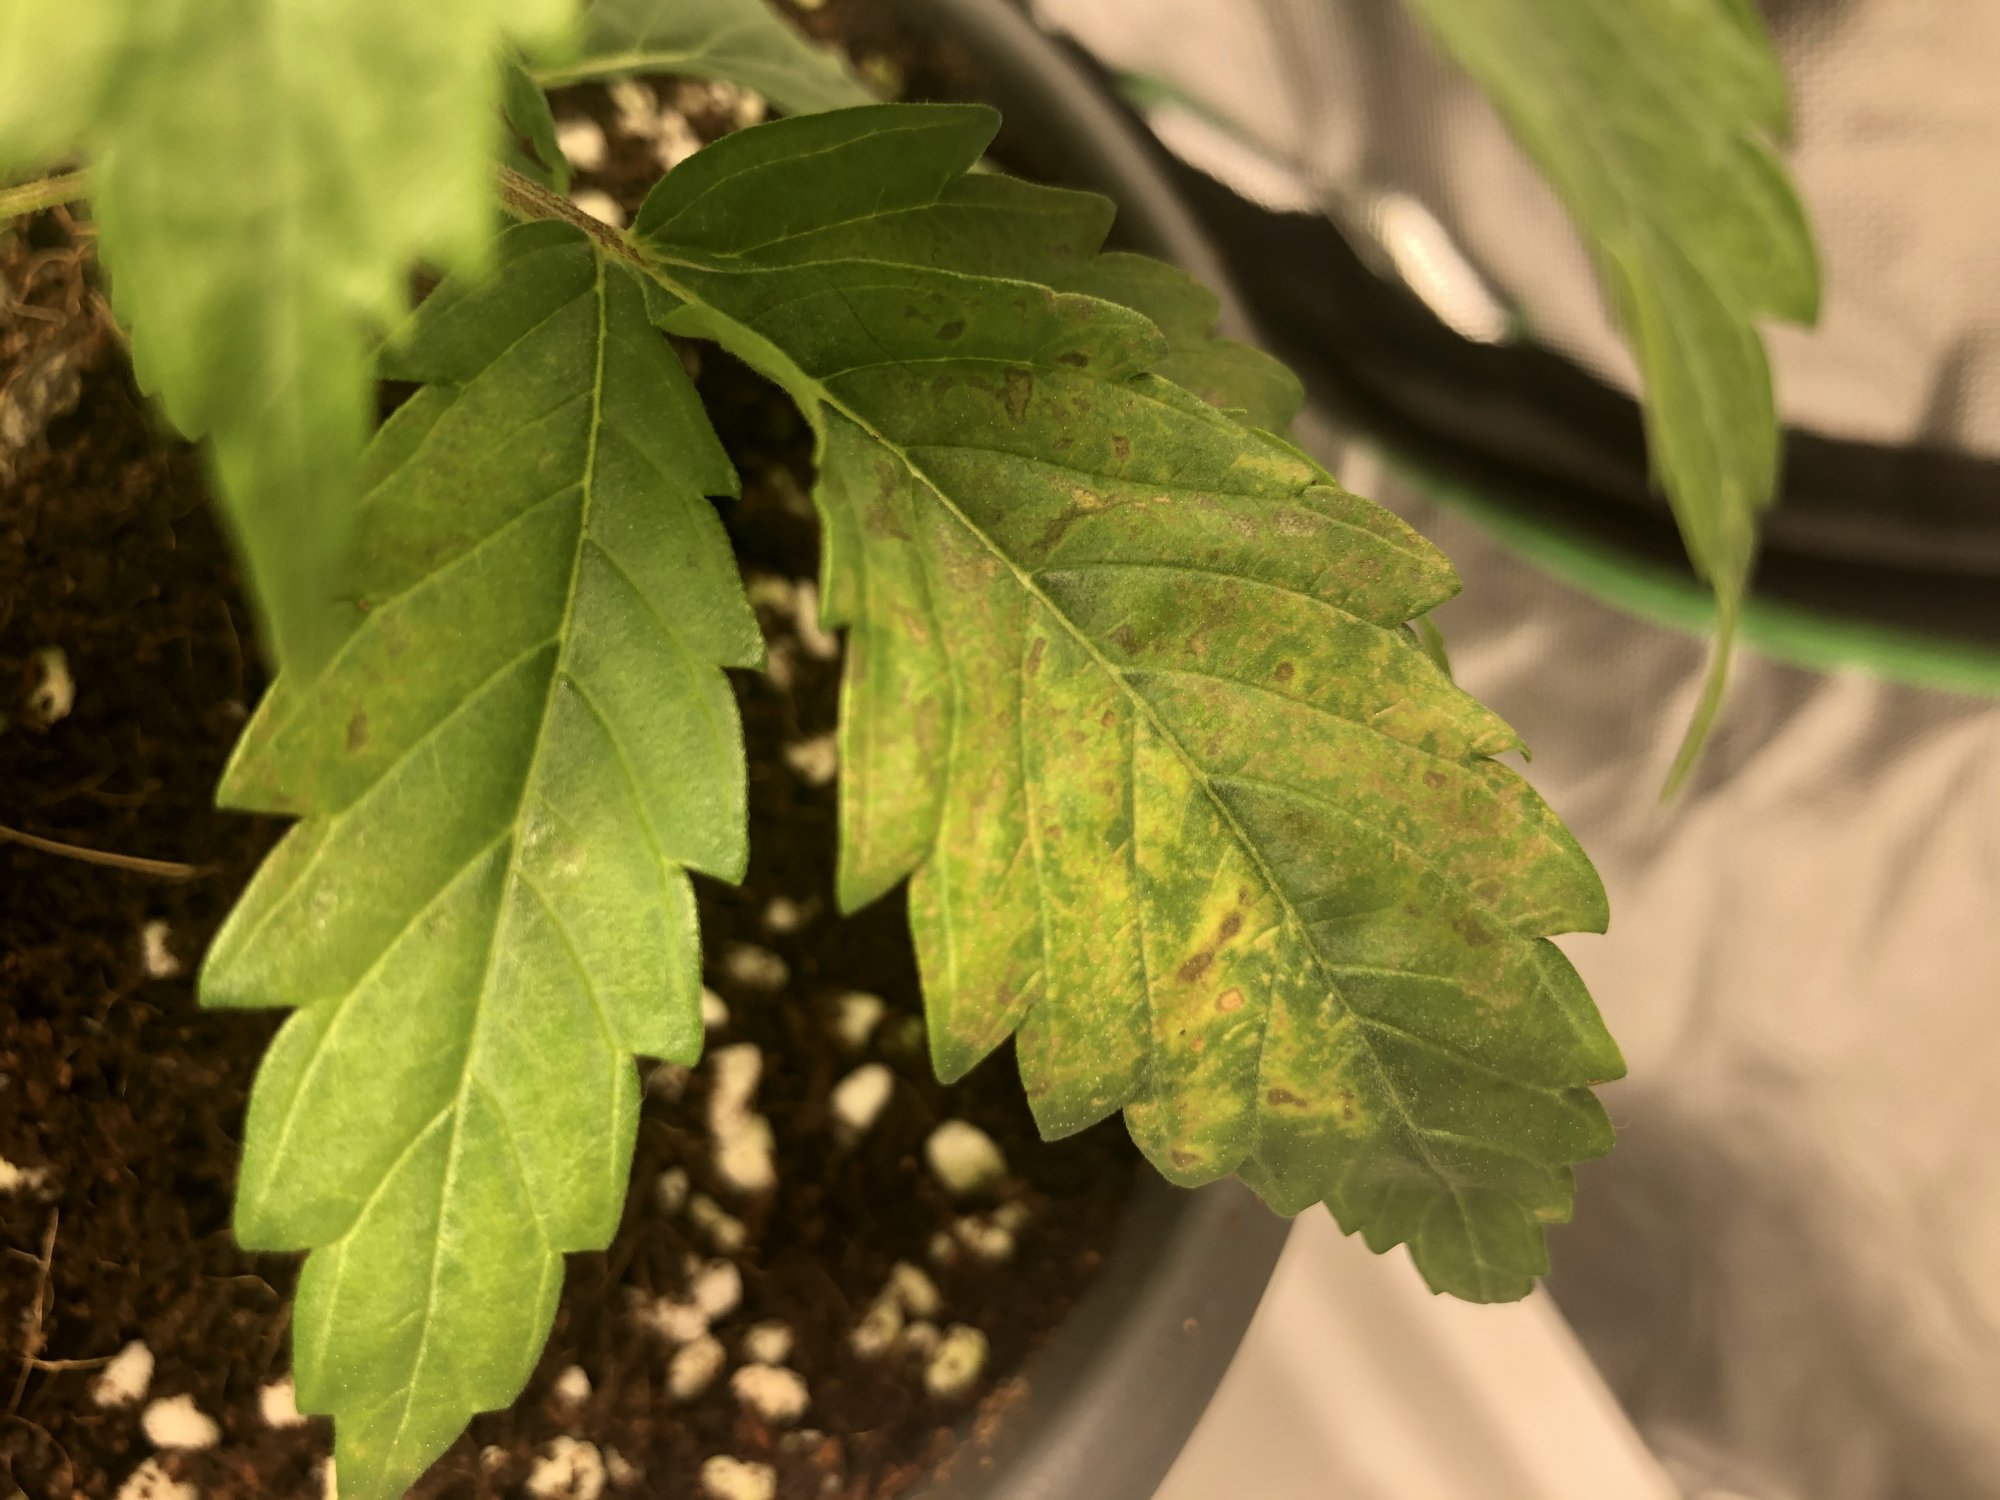 Can anyone identify the deficiency here 5